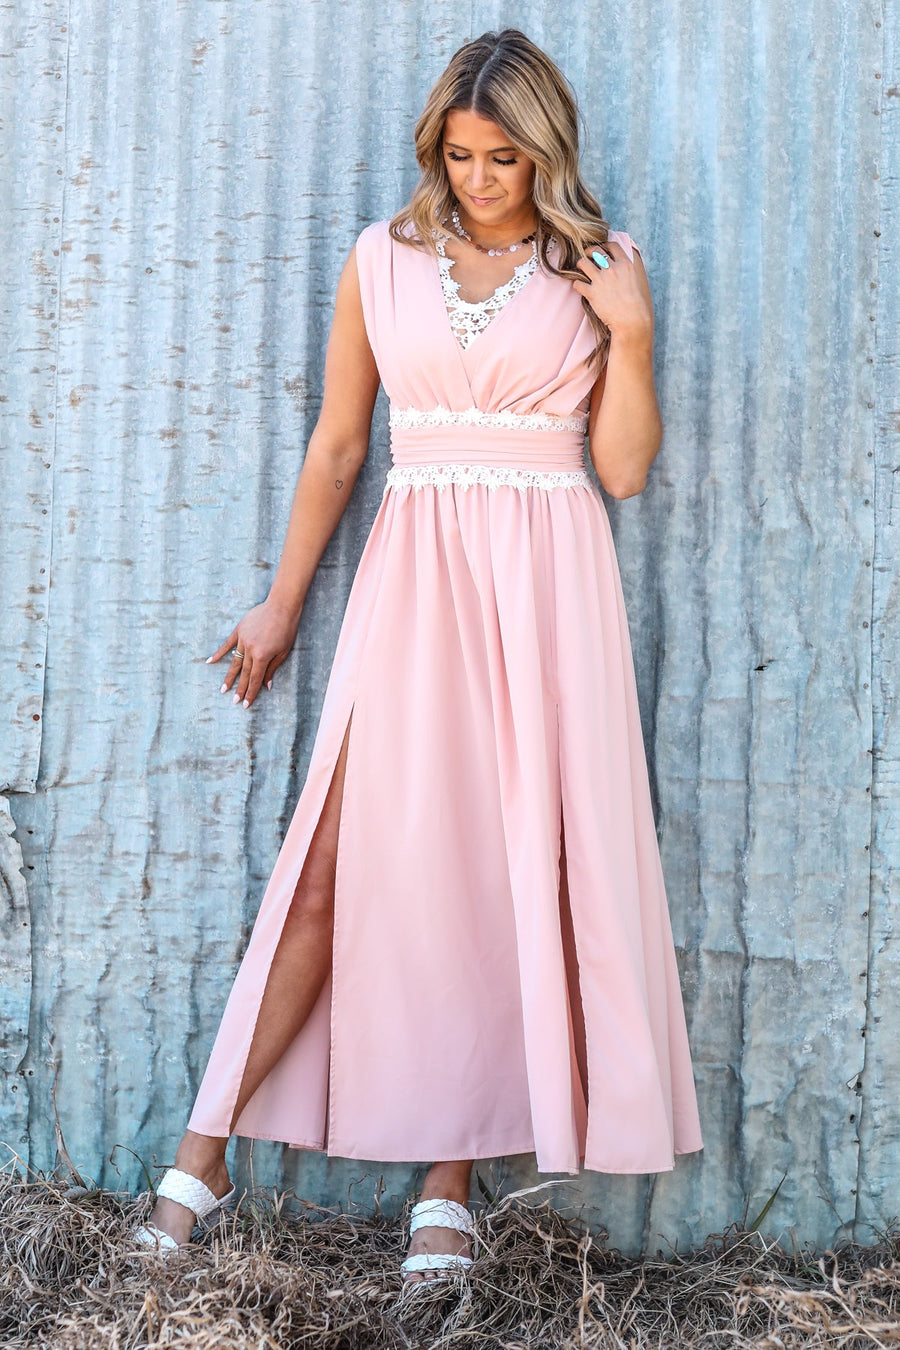 Peach and White Lace Trim Maxi Dress - Filly Flair